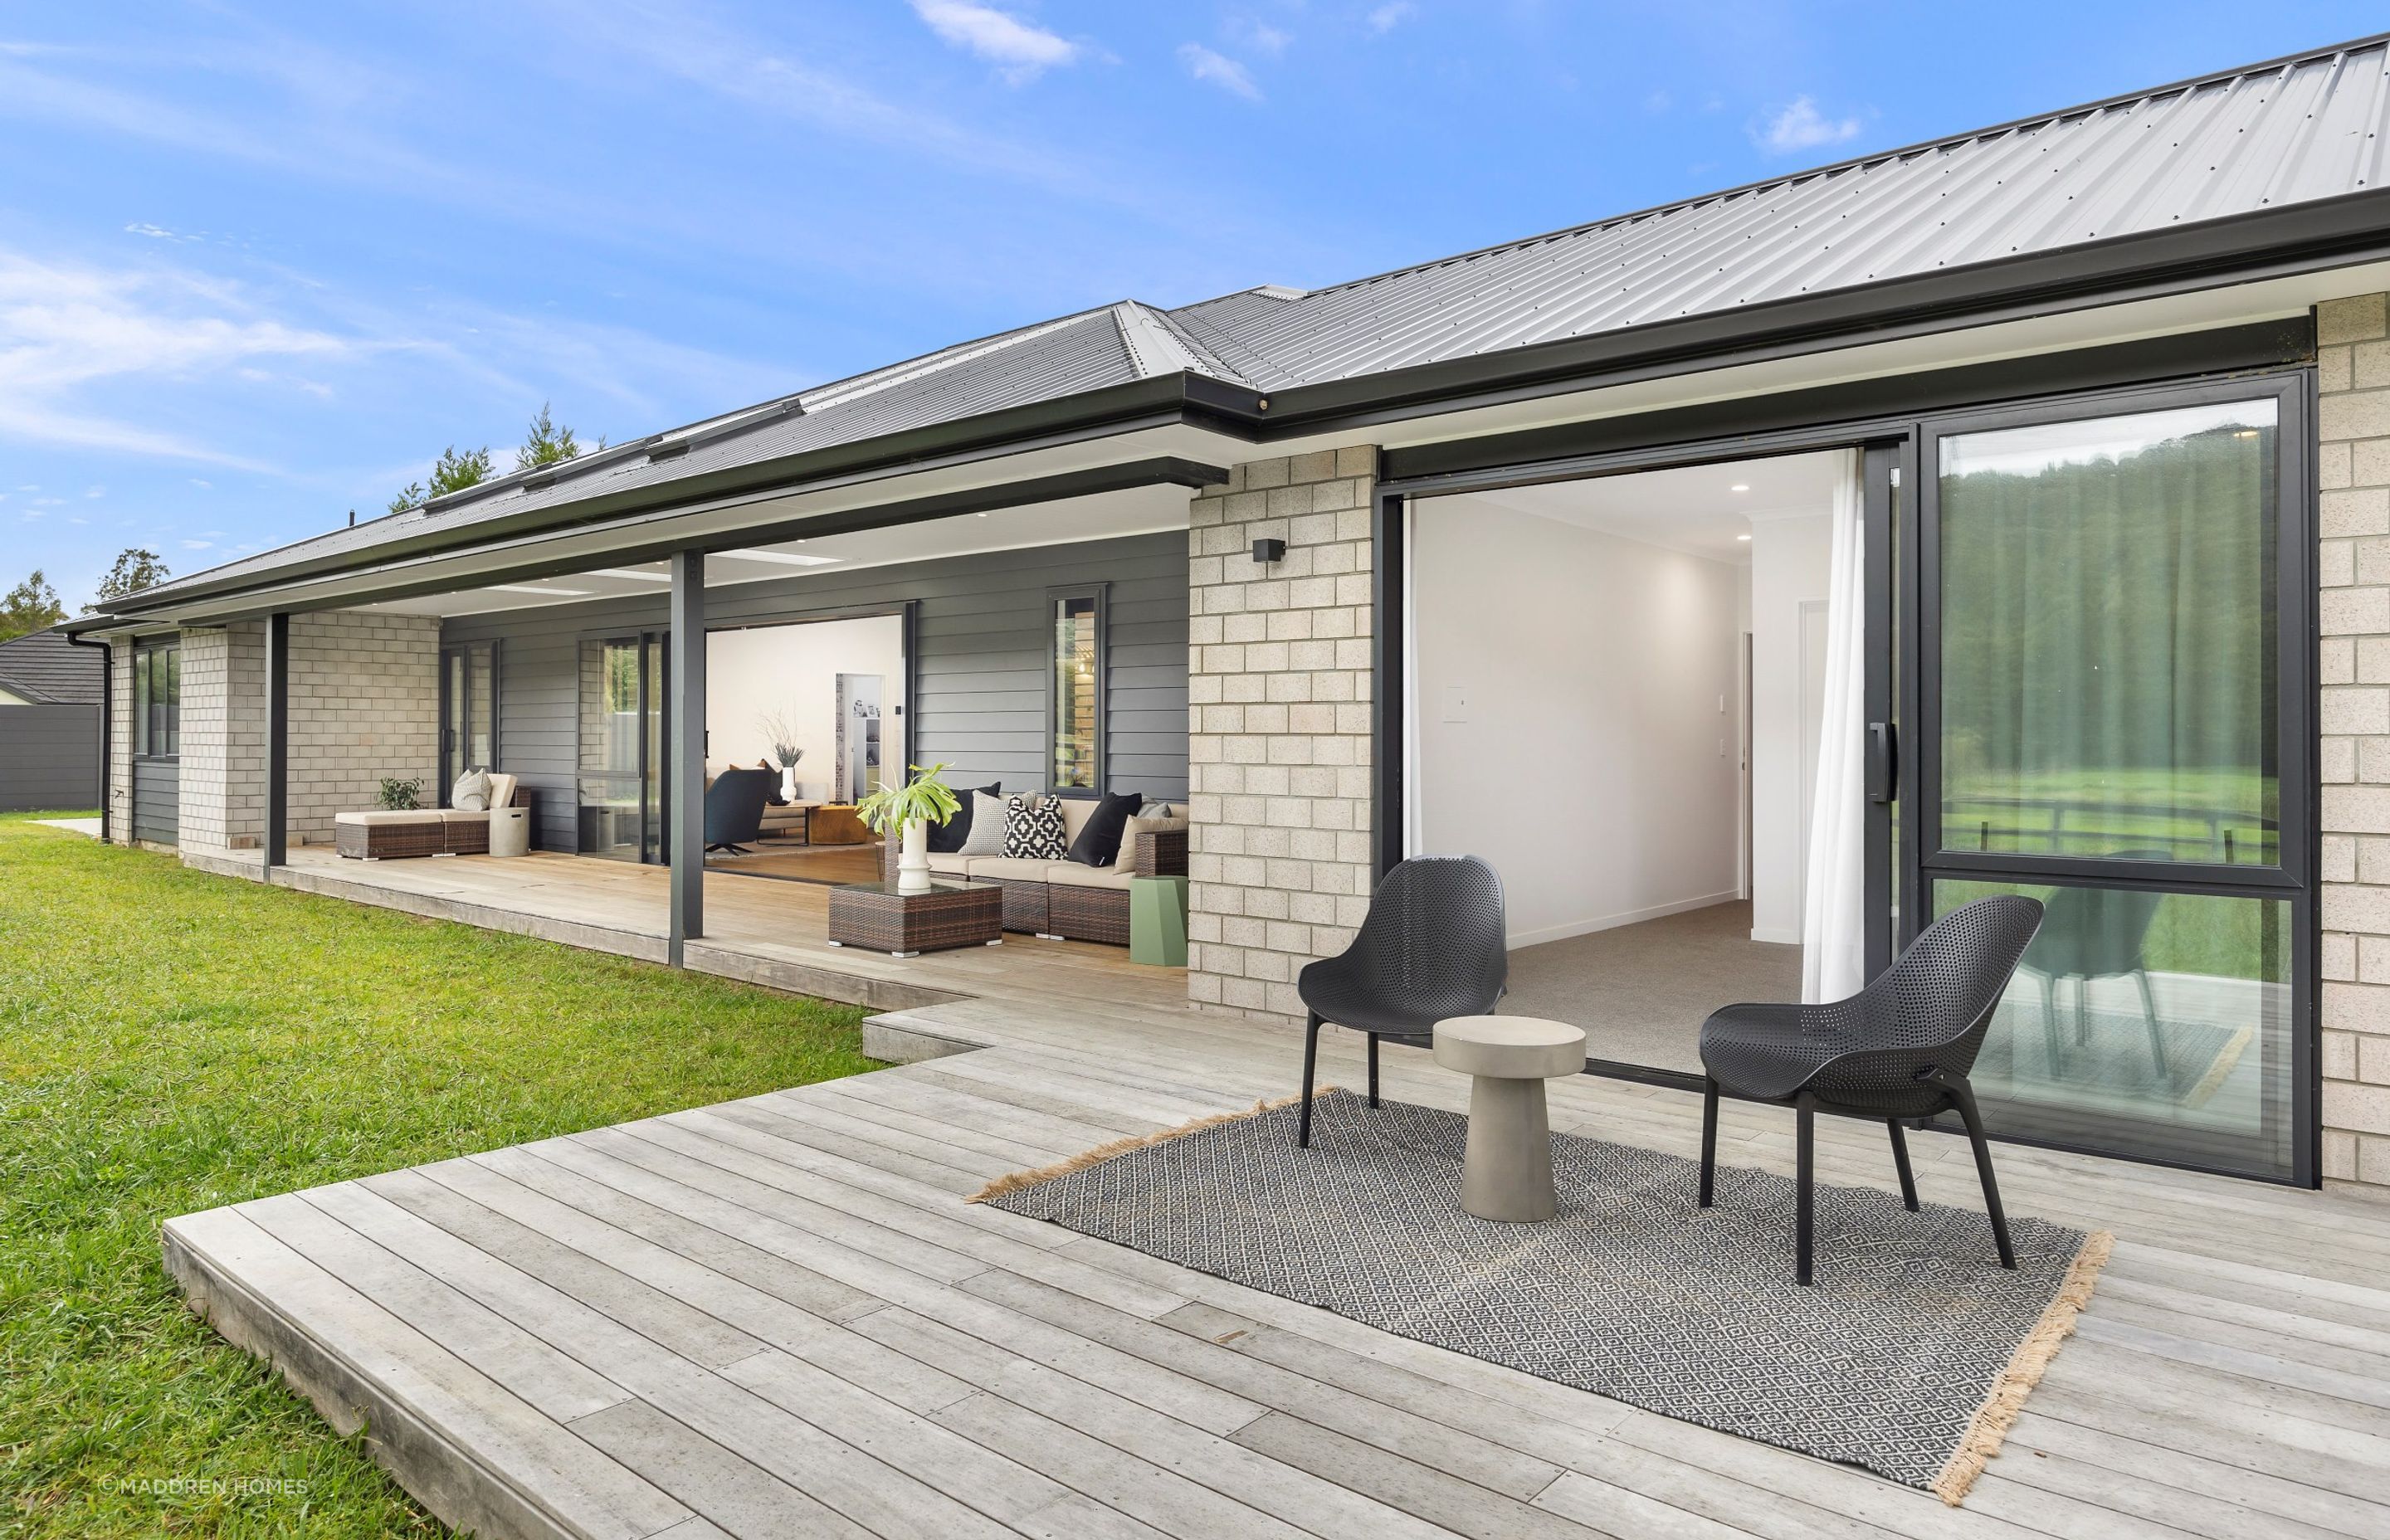 The simple inclusion of an outdoor rug, as seen here in this Auckland home, can add a touch of visual interest and texture.